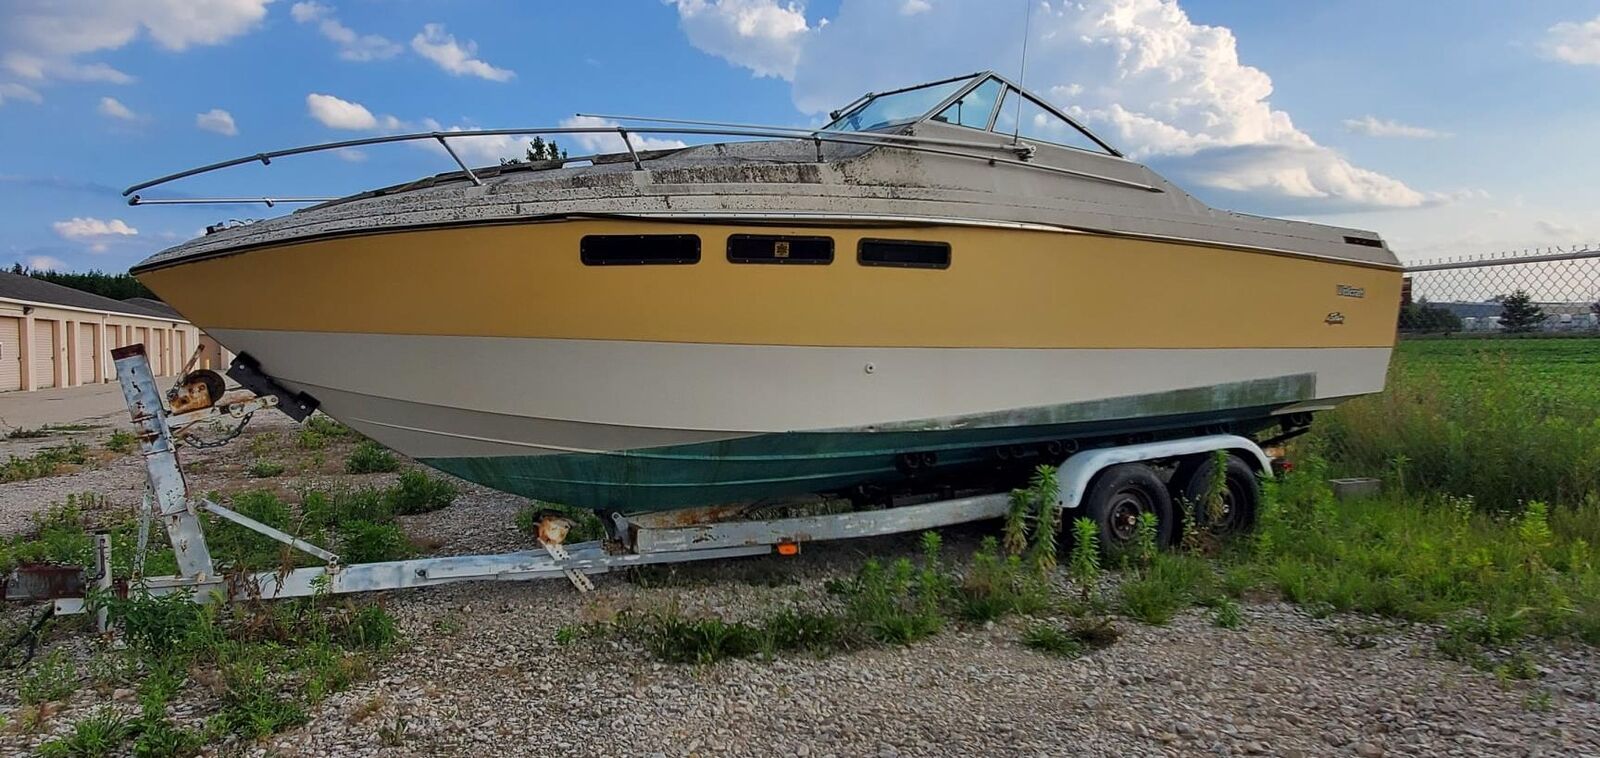 Wellcraft 25' Boat Located In Northwood, OH - Has Trailer